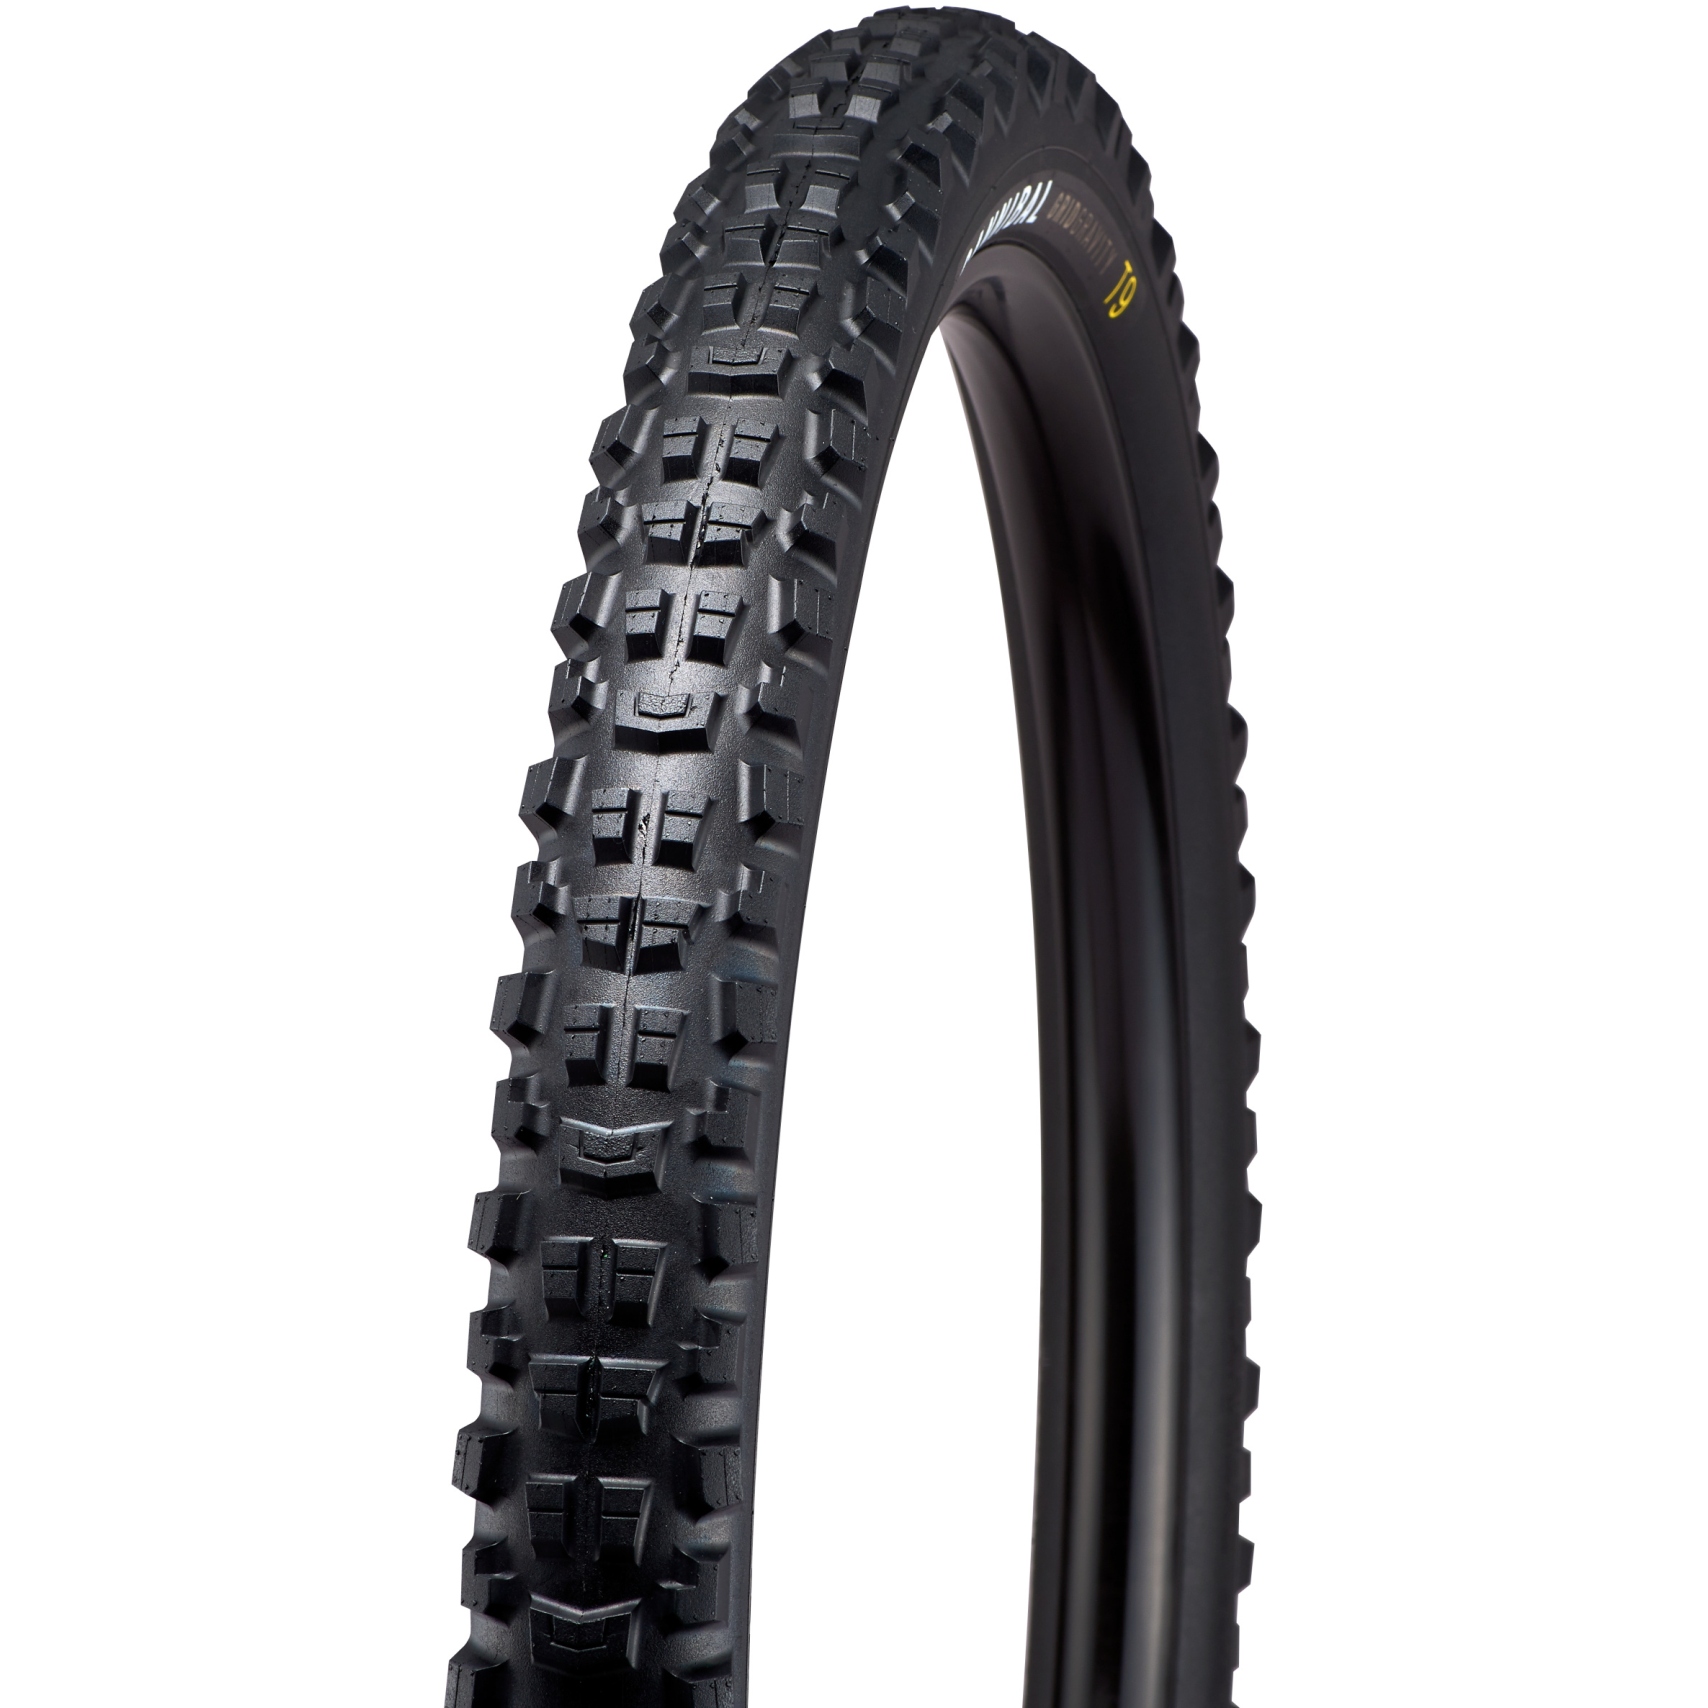 Productfoto van Specialized Cannibal Grid Gravity 2Bliss Ready T9 MTB Vouwband - 27.5x2.4 | Zwart